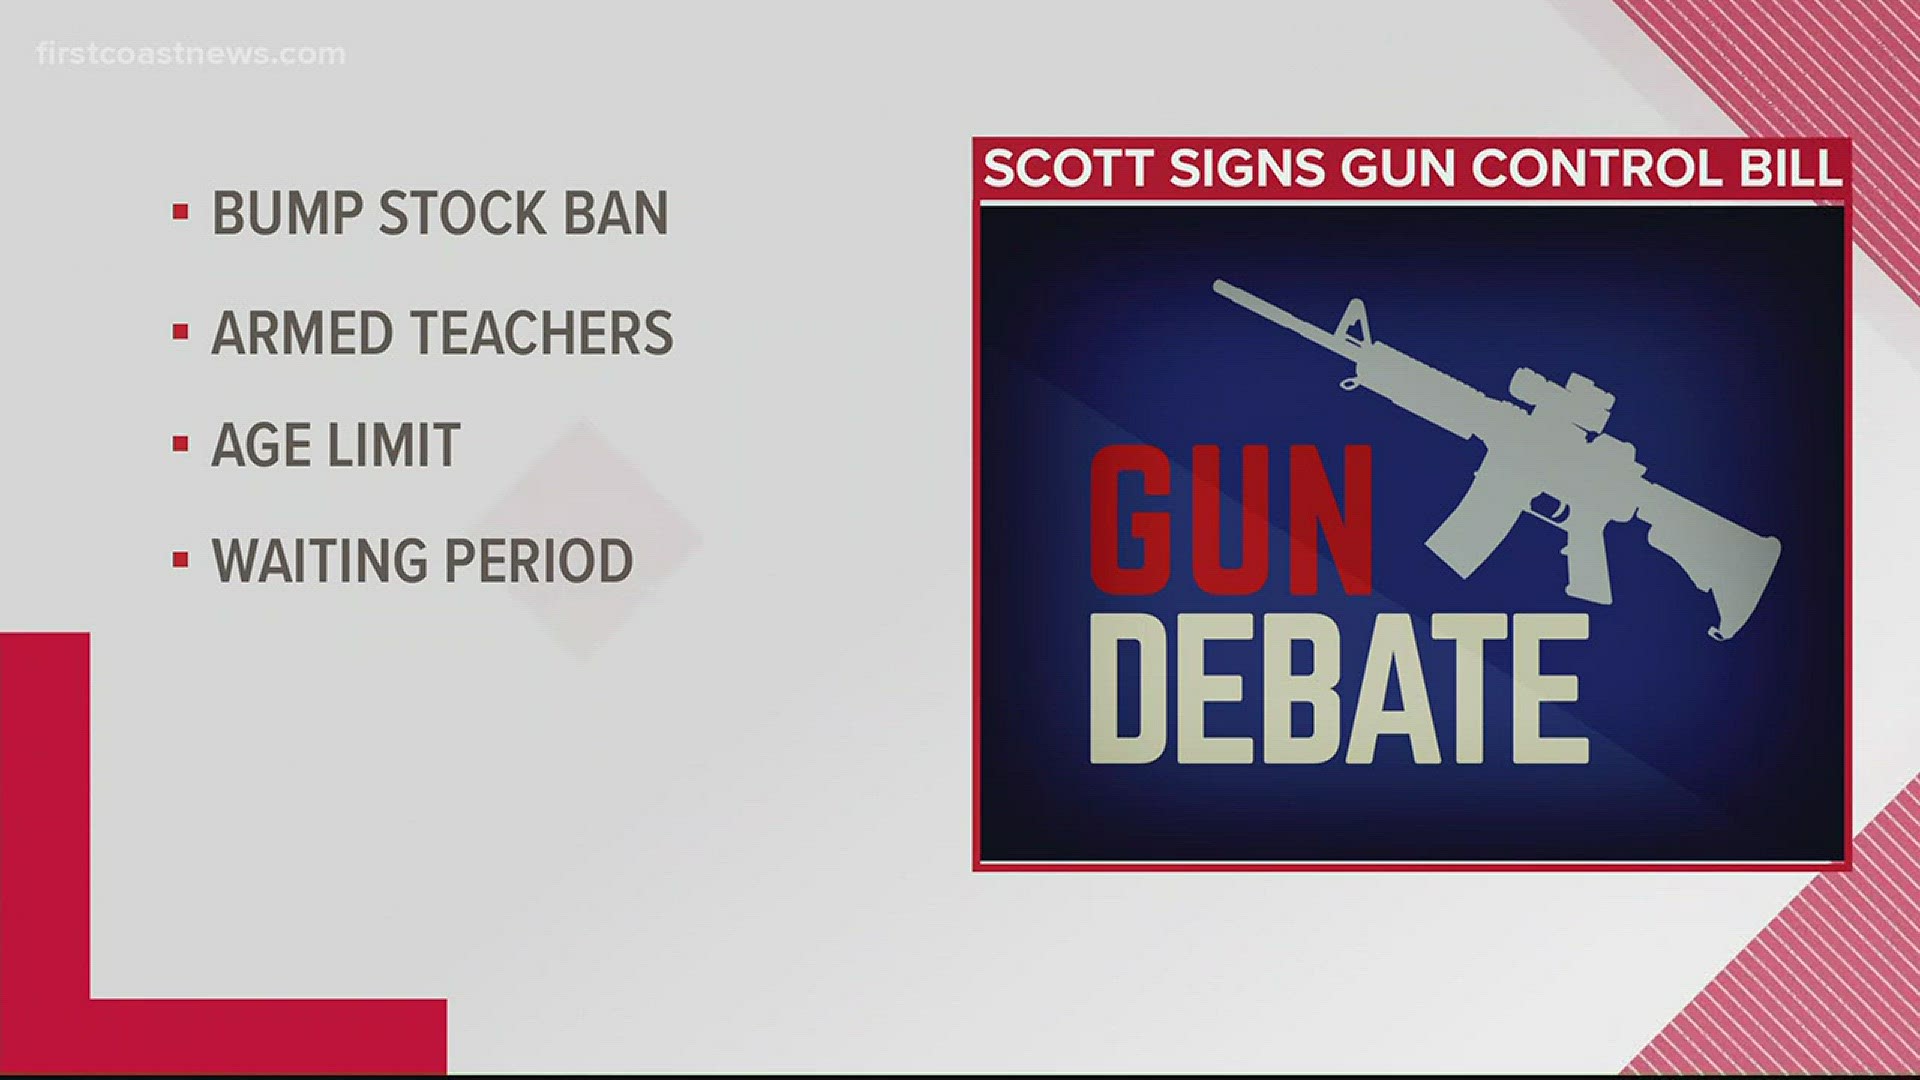 The bill now creates a bump stock ban, arms some teachers, raises the age limit to 21.